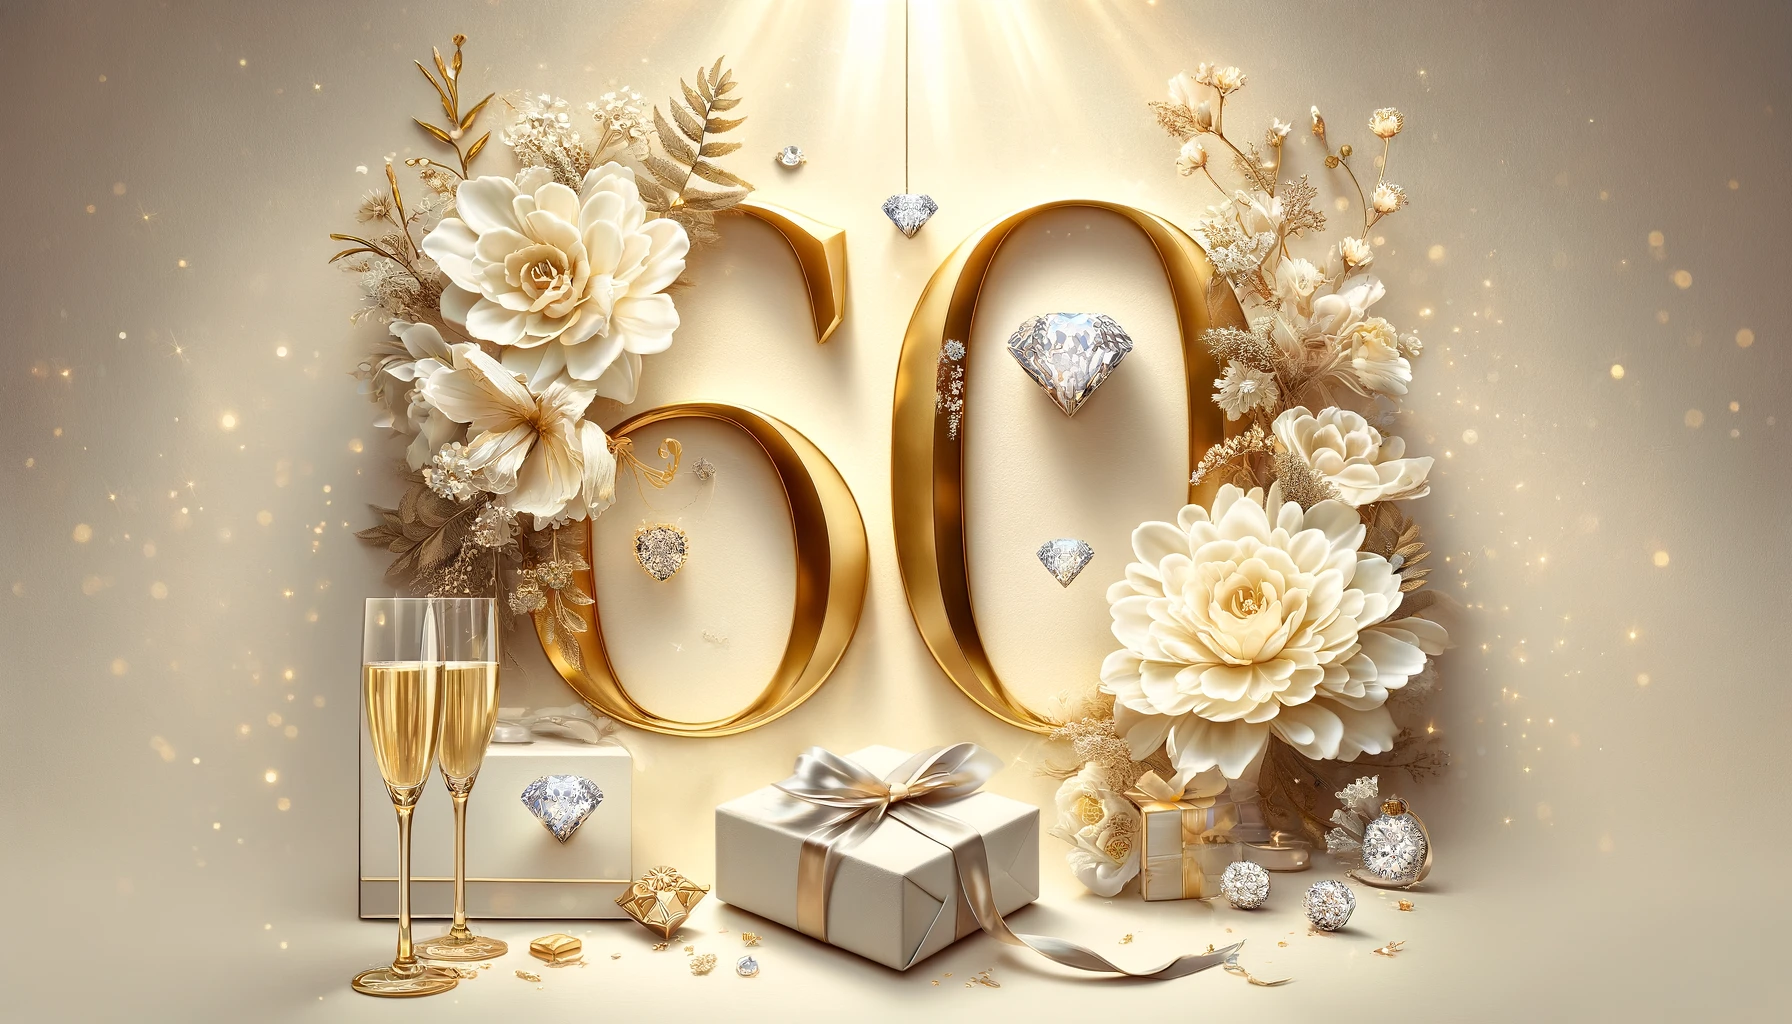 Quotes for the 60th Wedding Anniversary